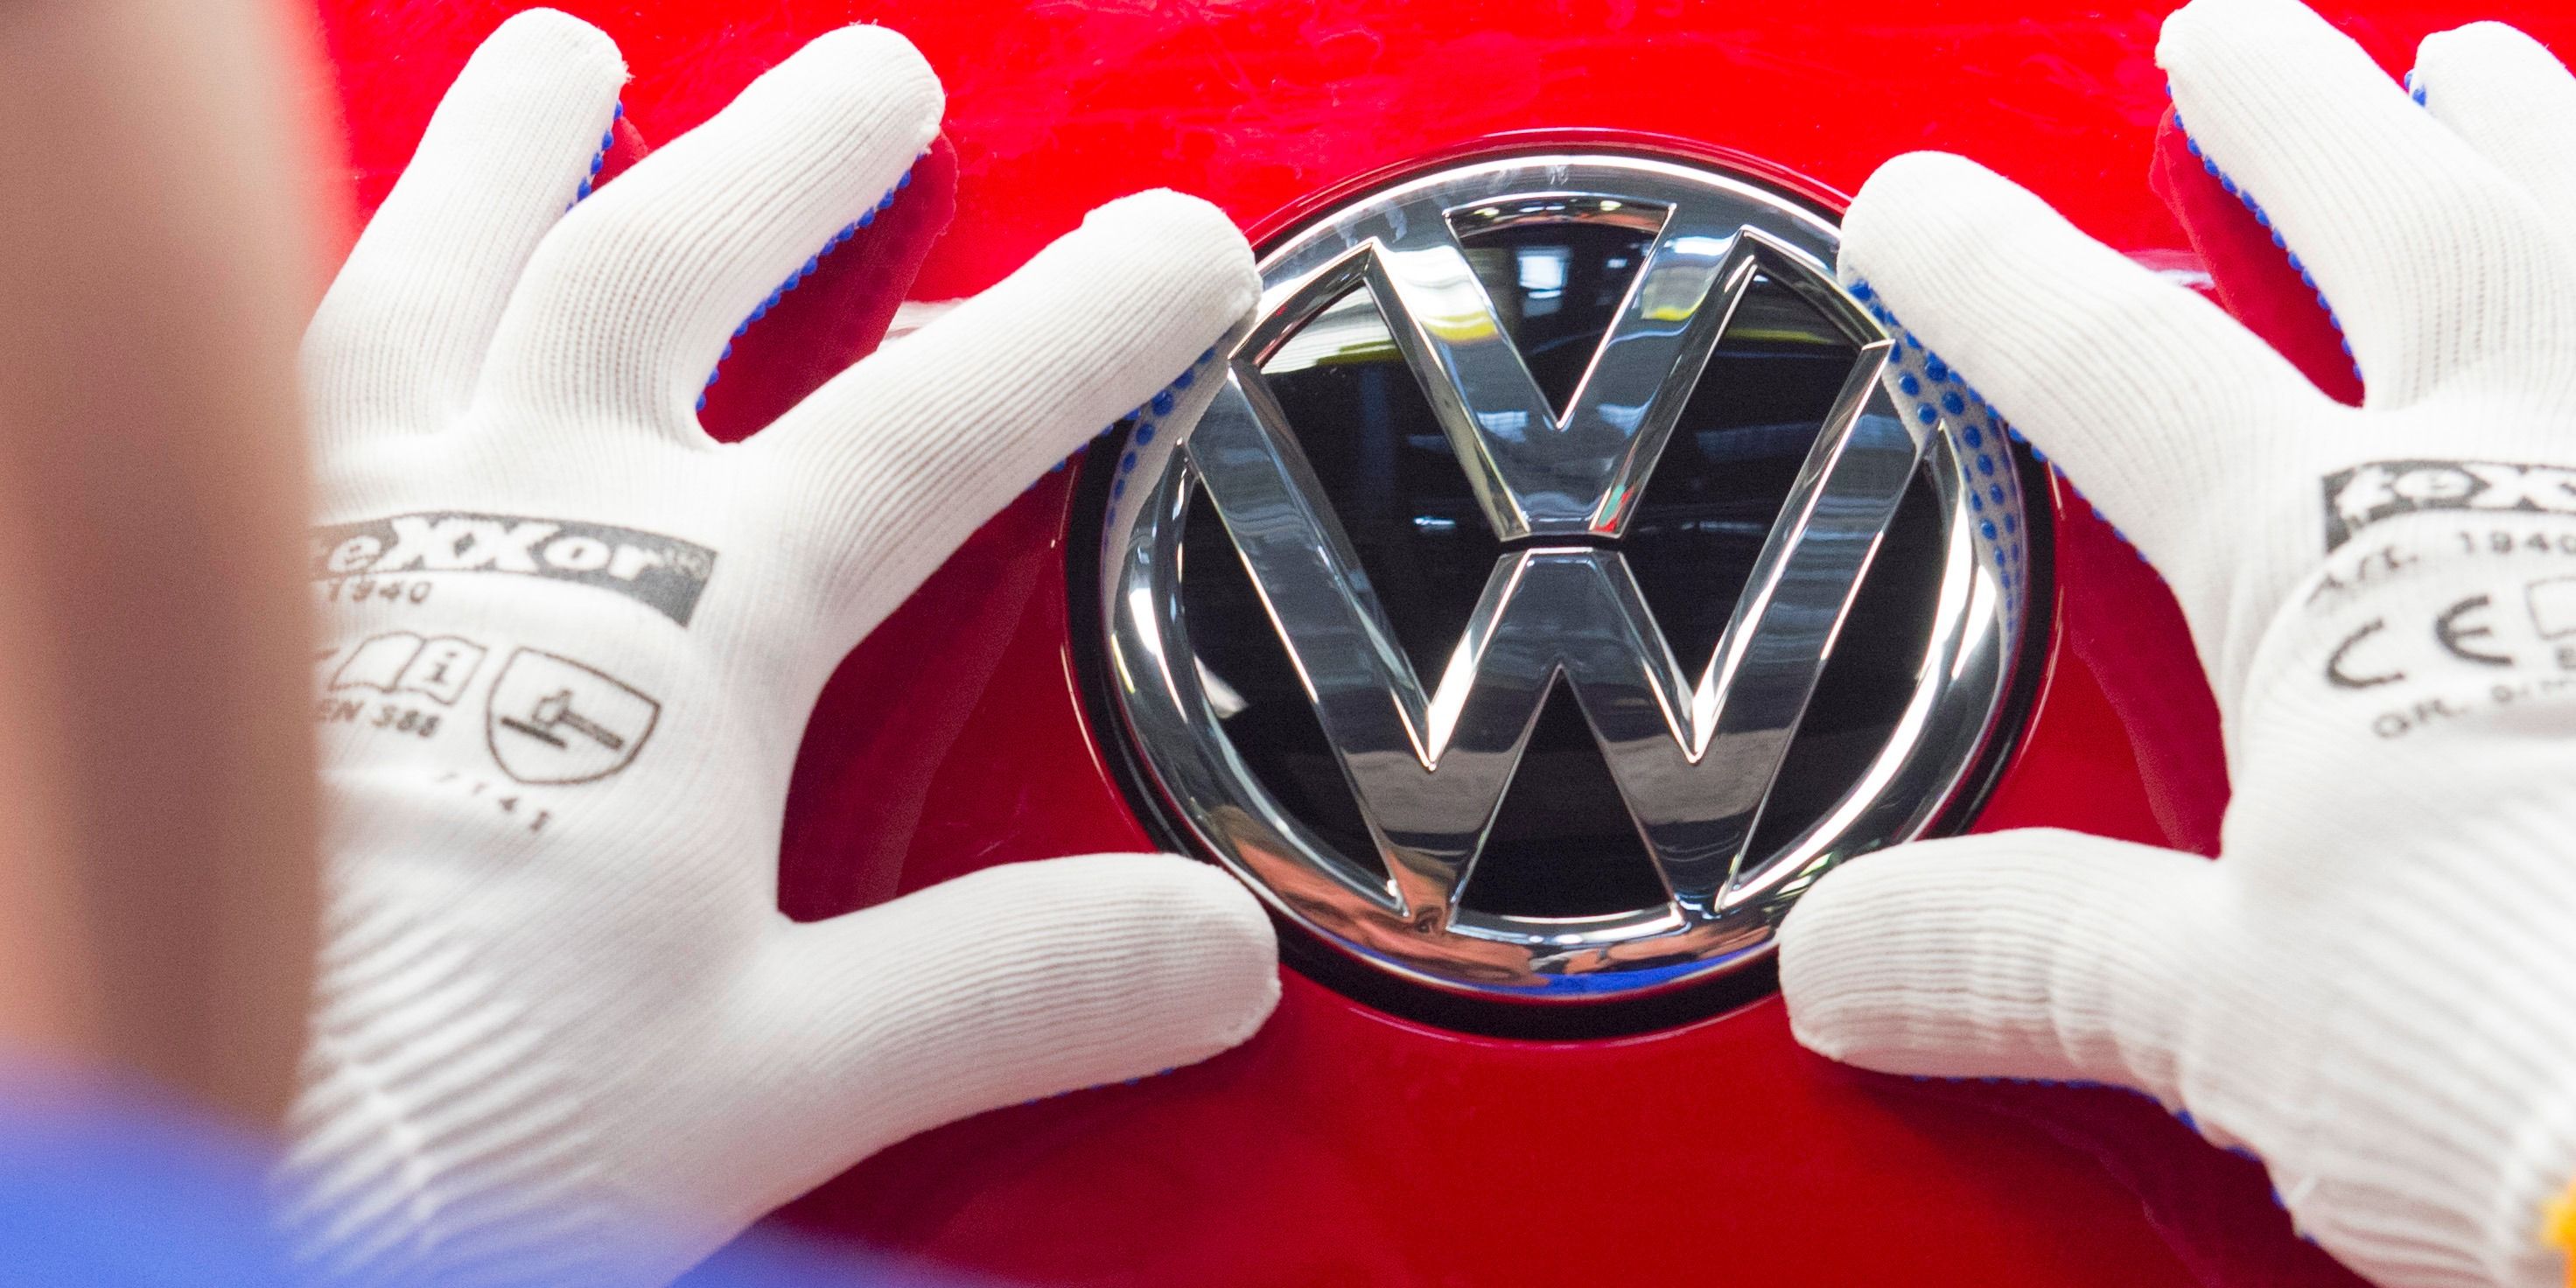 Volkswagen UK used “defeat devices” in EU test results, 1.2 million diesel vehicles affected